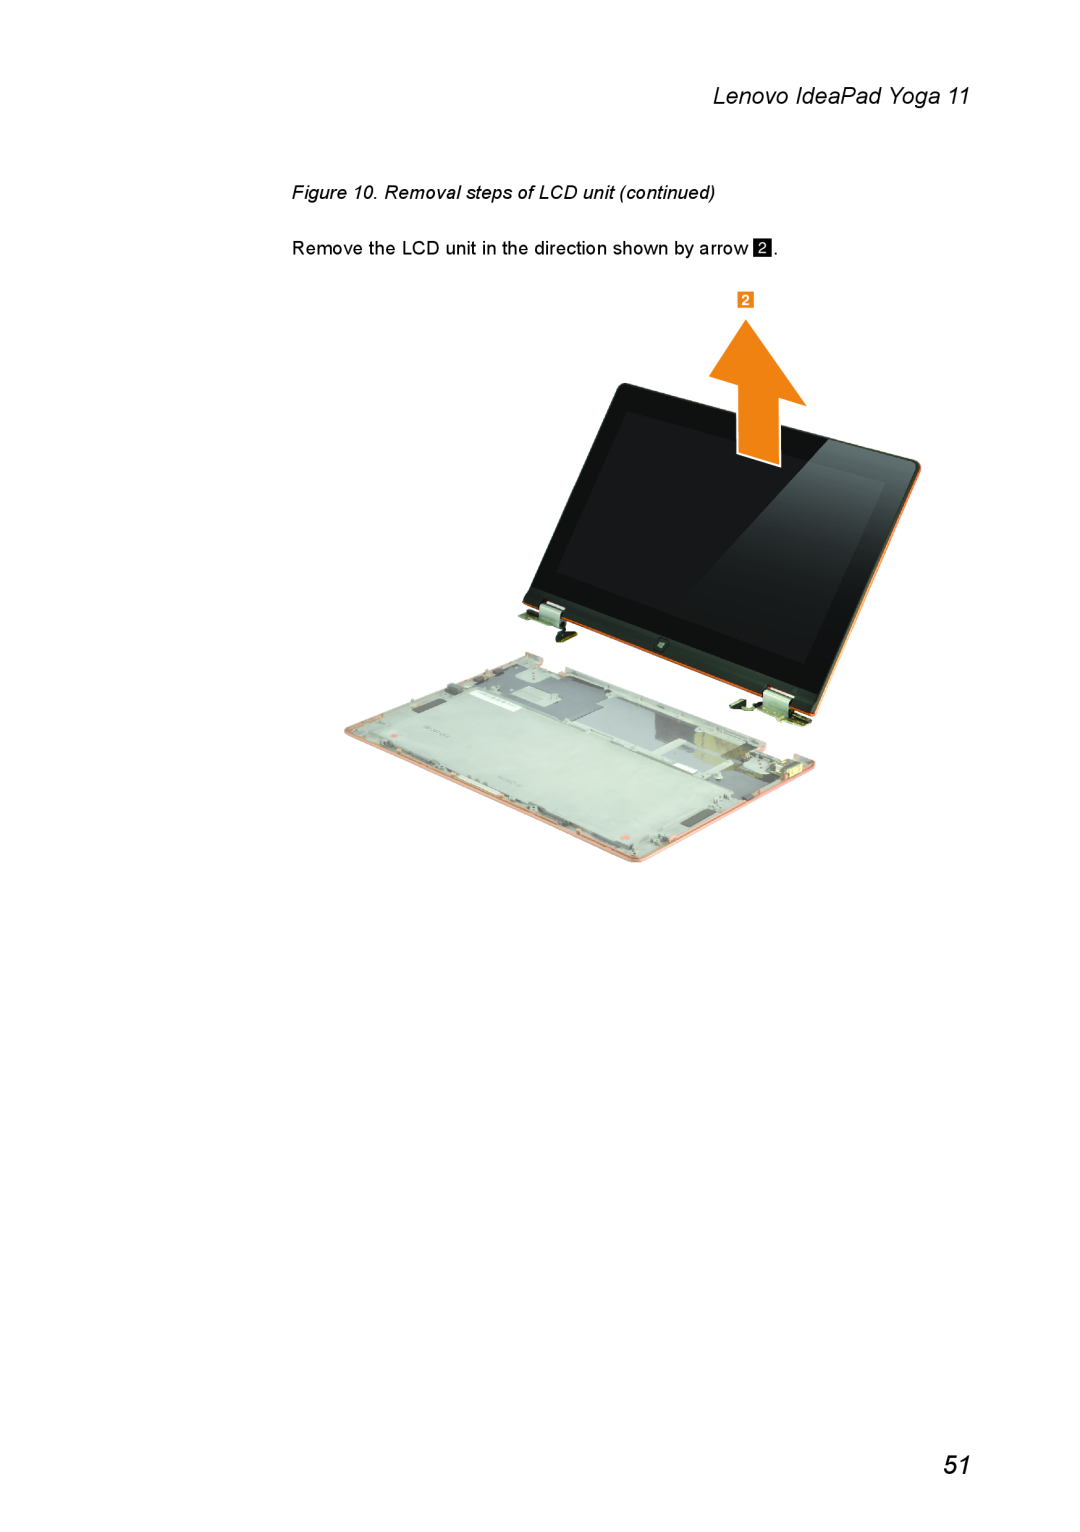 Lenovo 11 Removal steps of LCD unit continued, Lenovo IdeaPad Yoga, Remove the LCD unit in the direction shown by arrow 